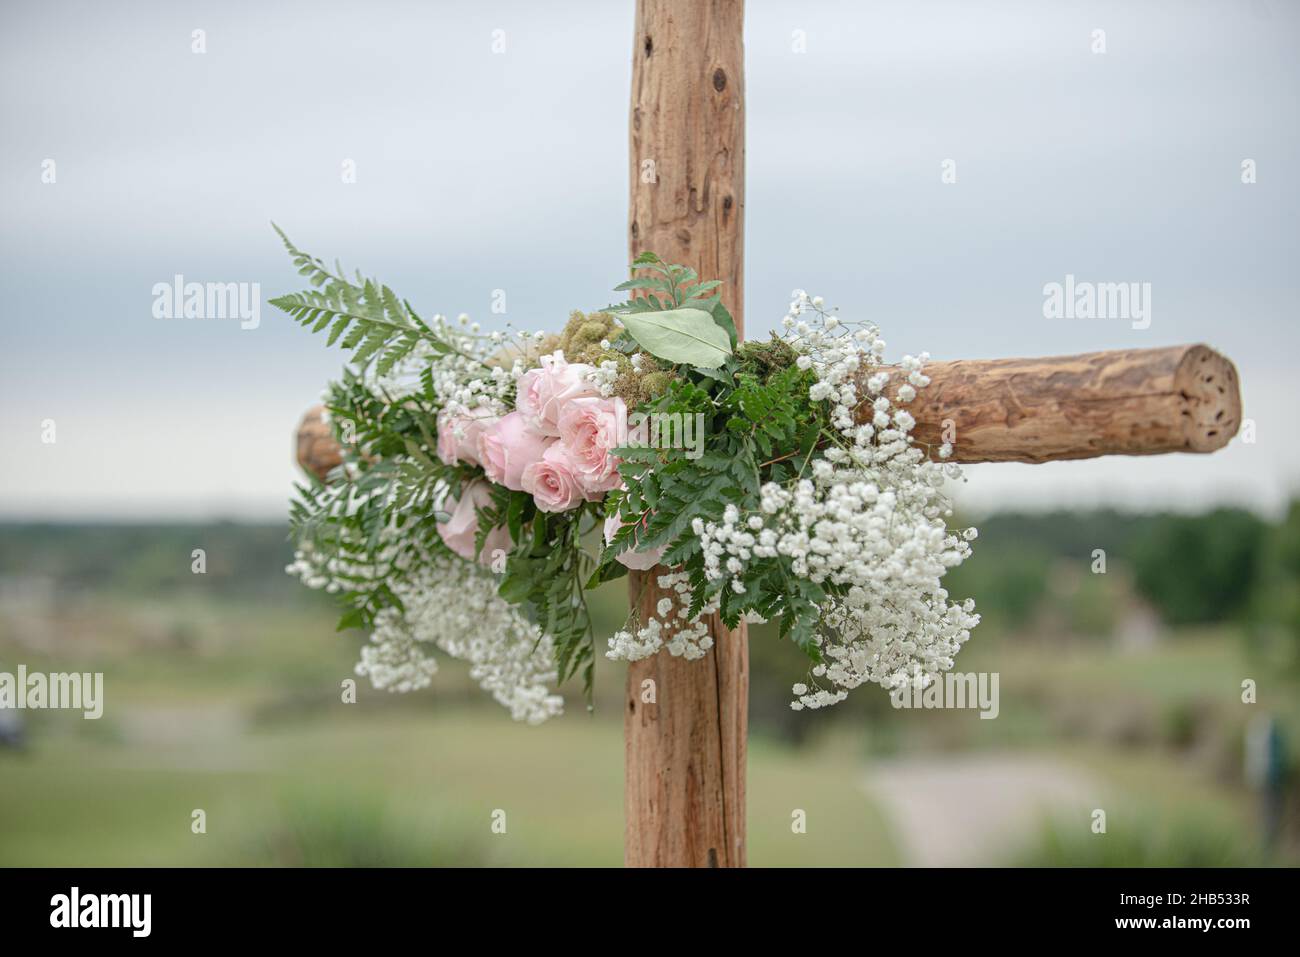 Wooden cross wedding altar with pink roses for outdoor wedding ceremony Stock Photo